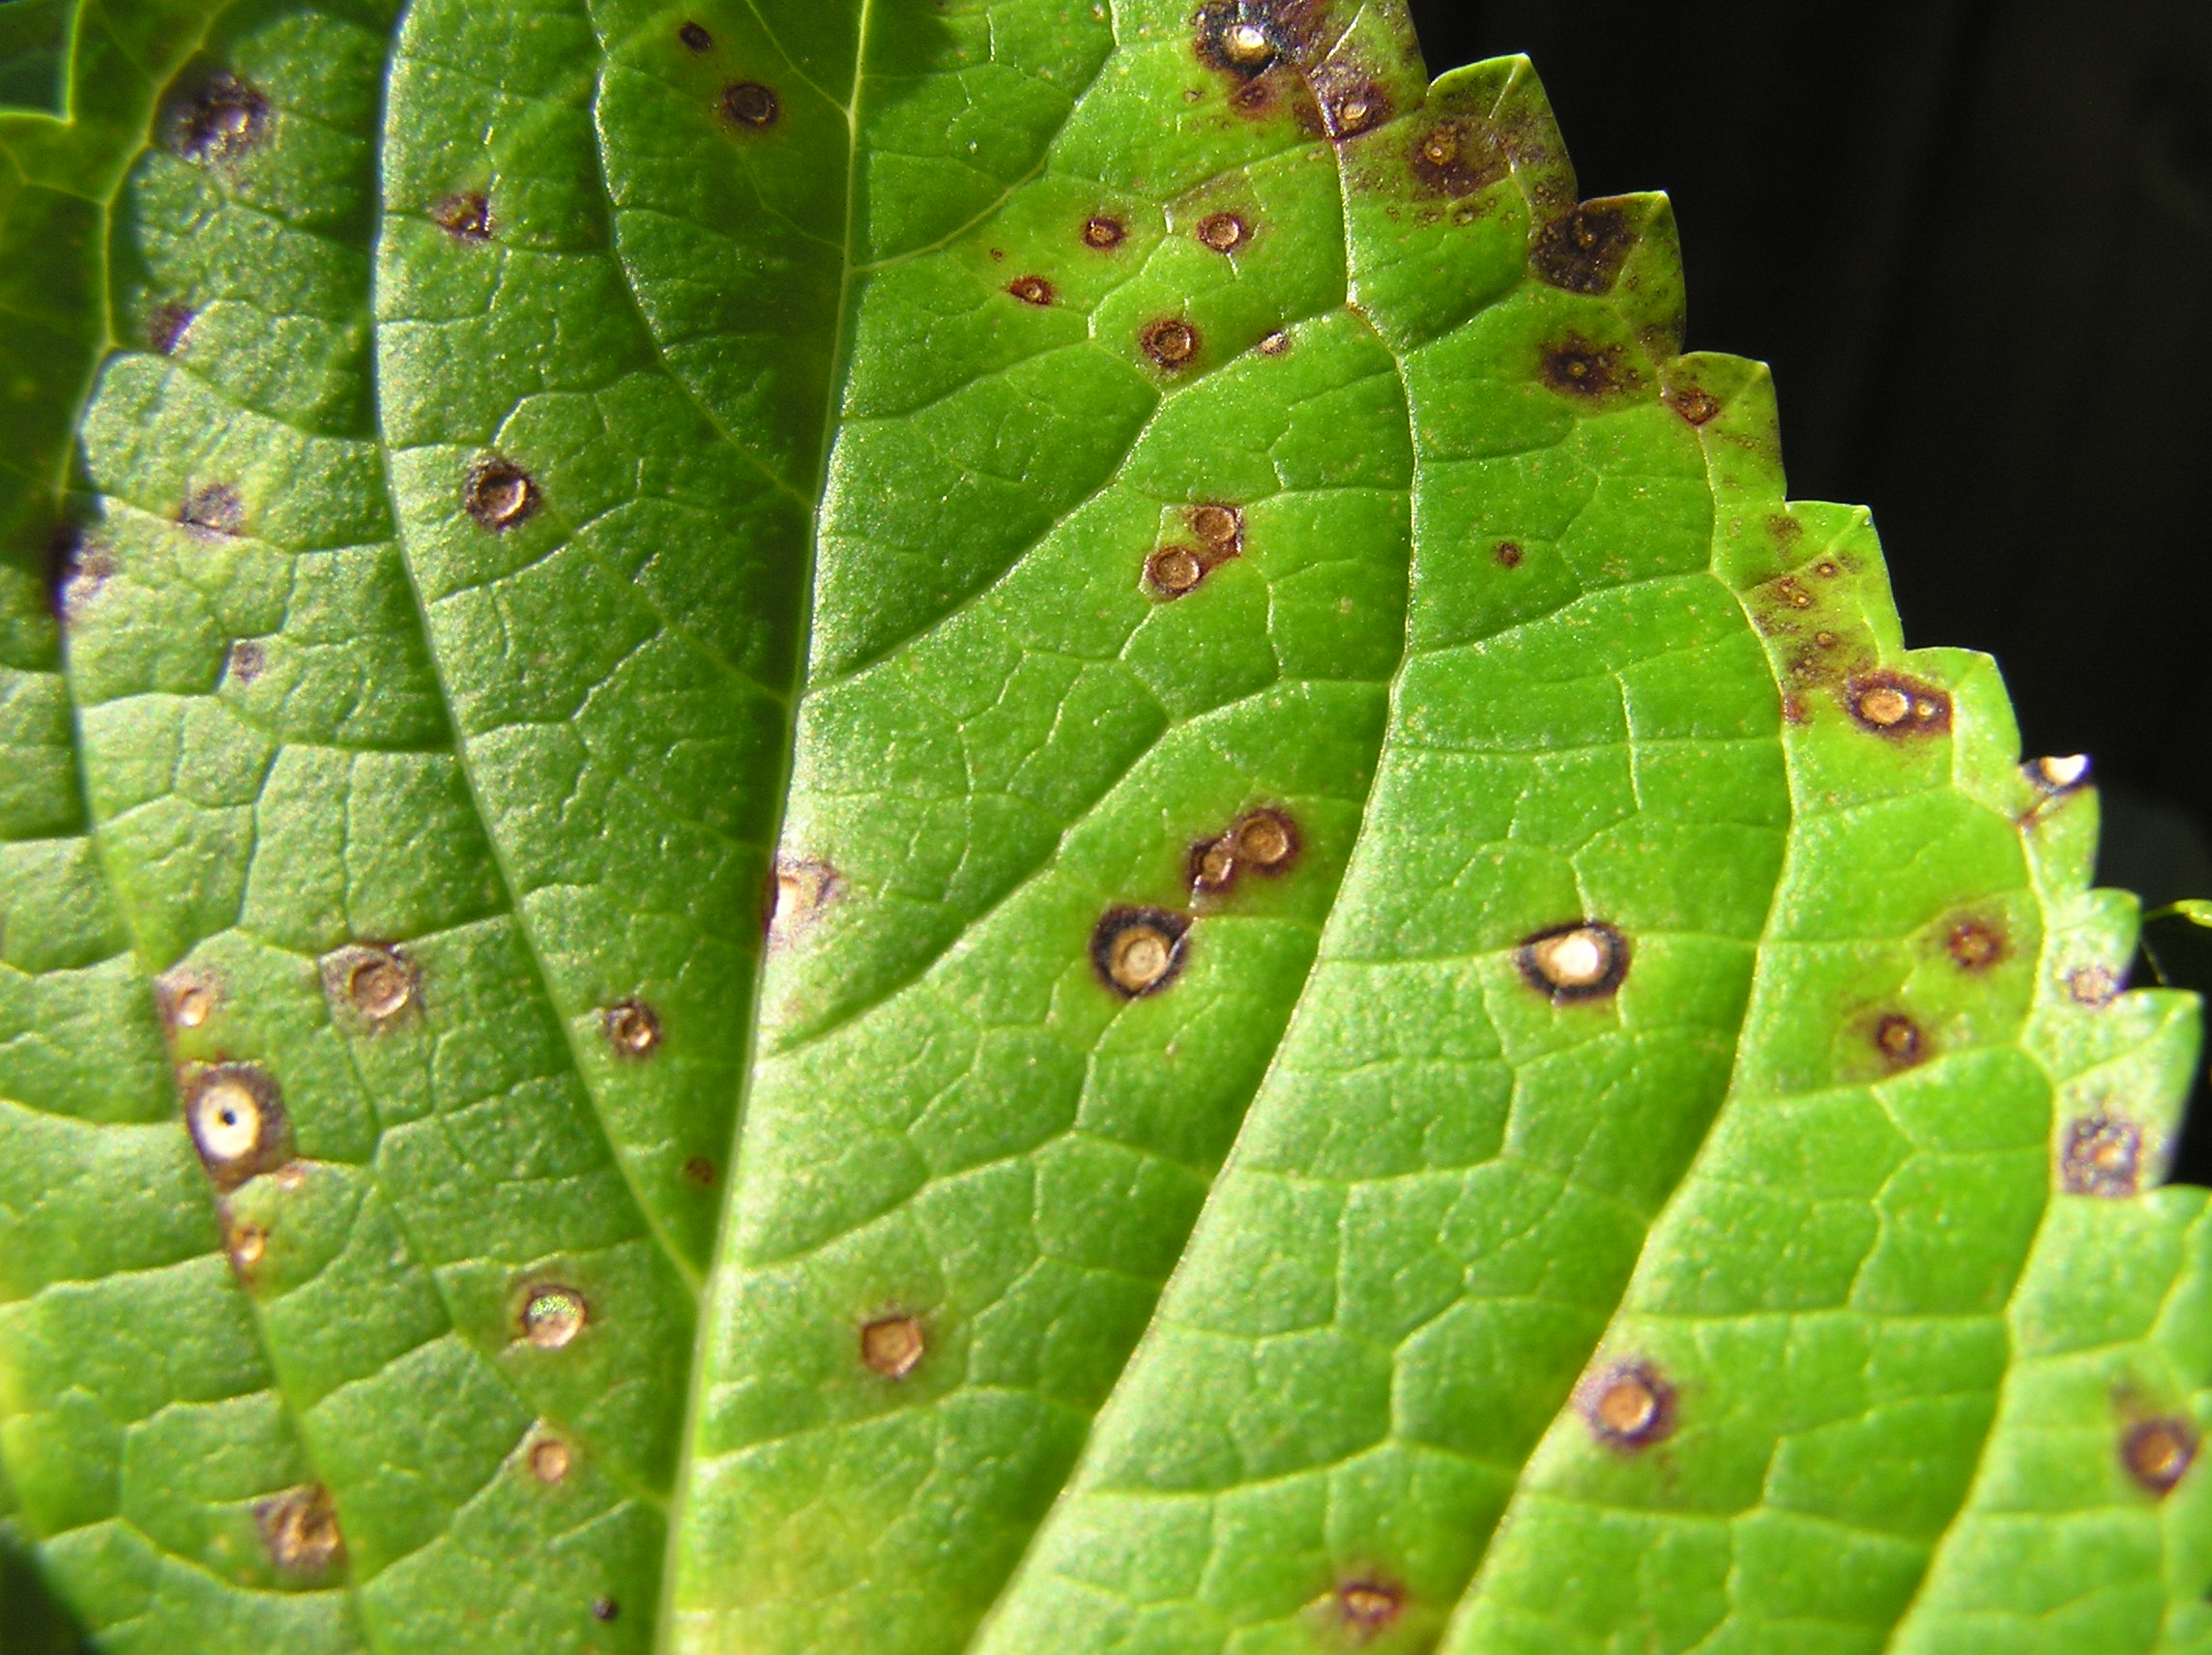 Leaf spots may mean a fungal disease